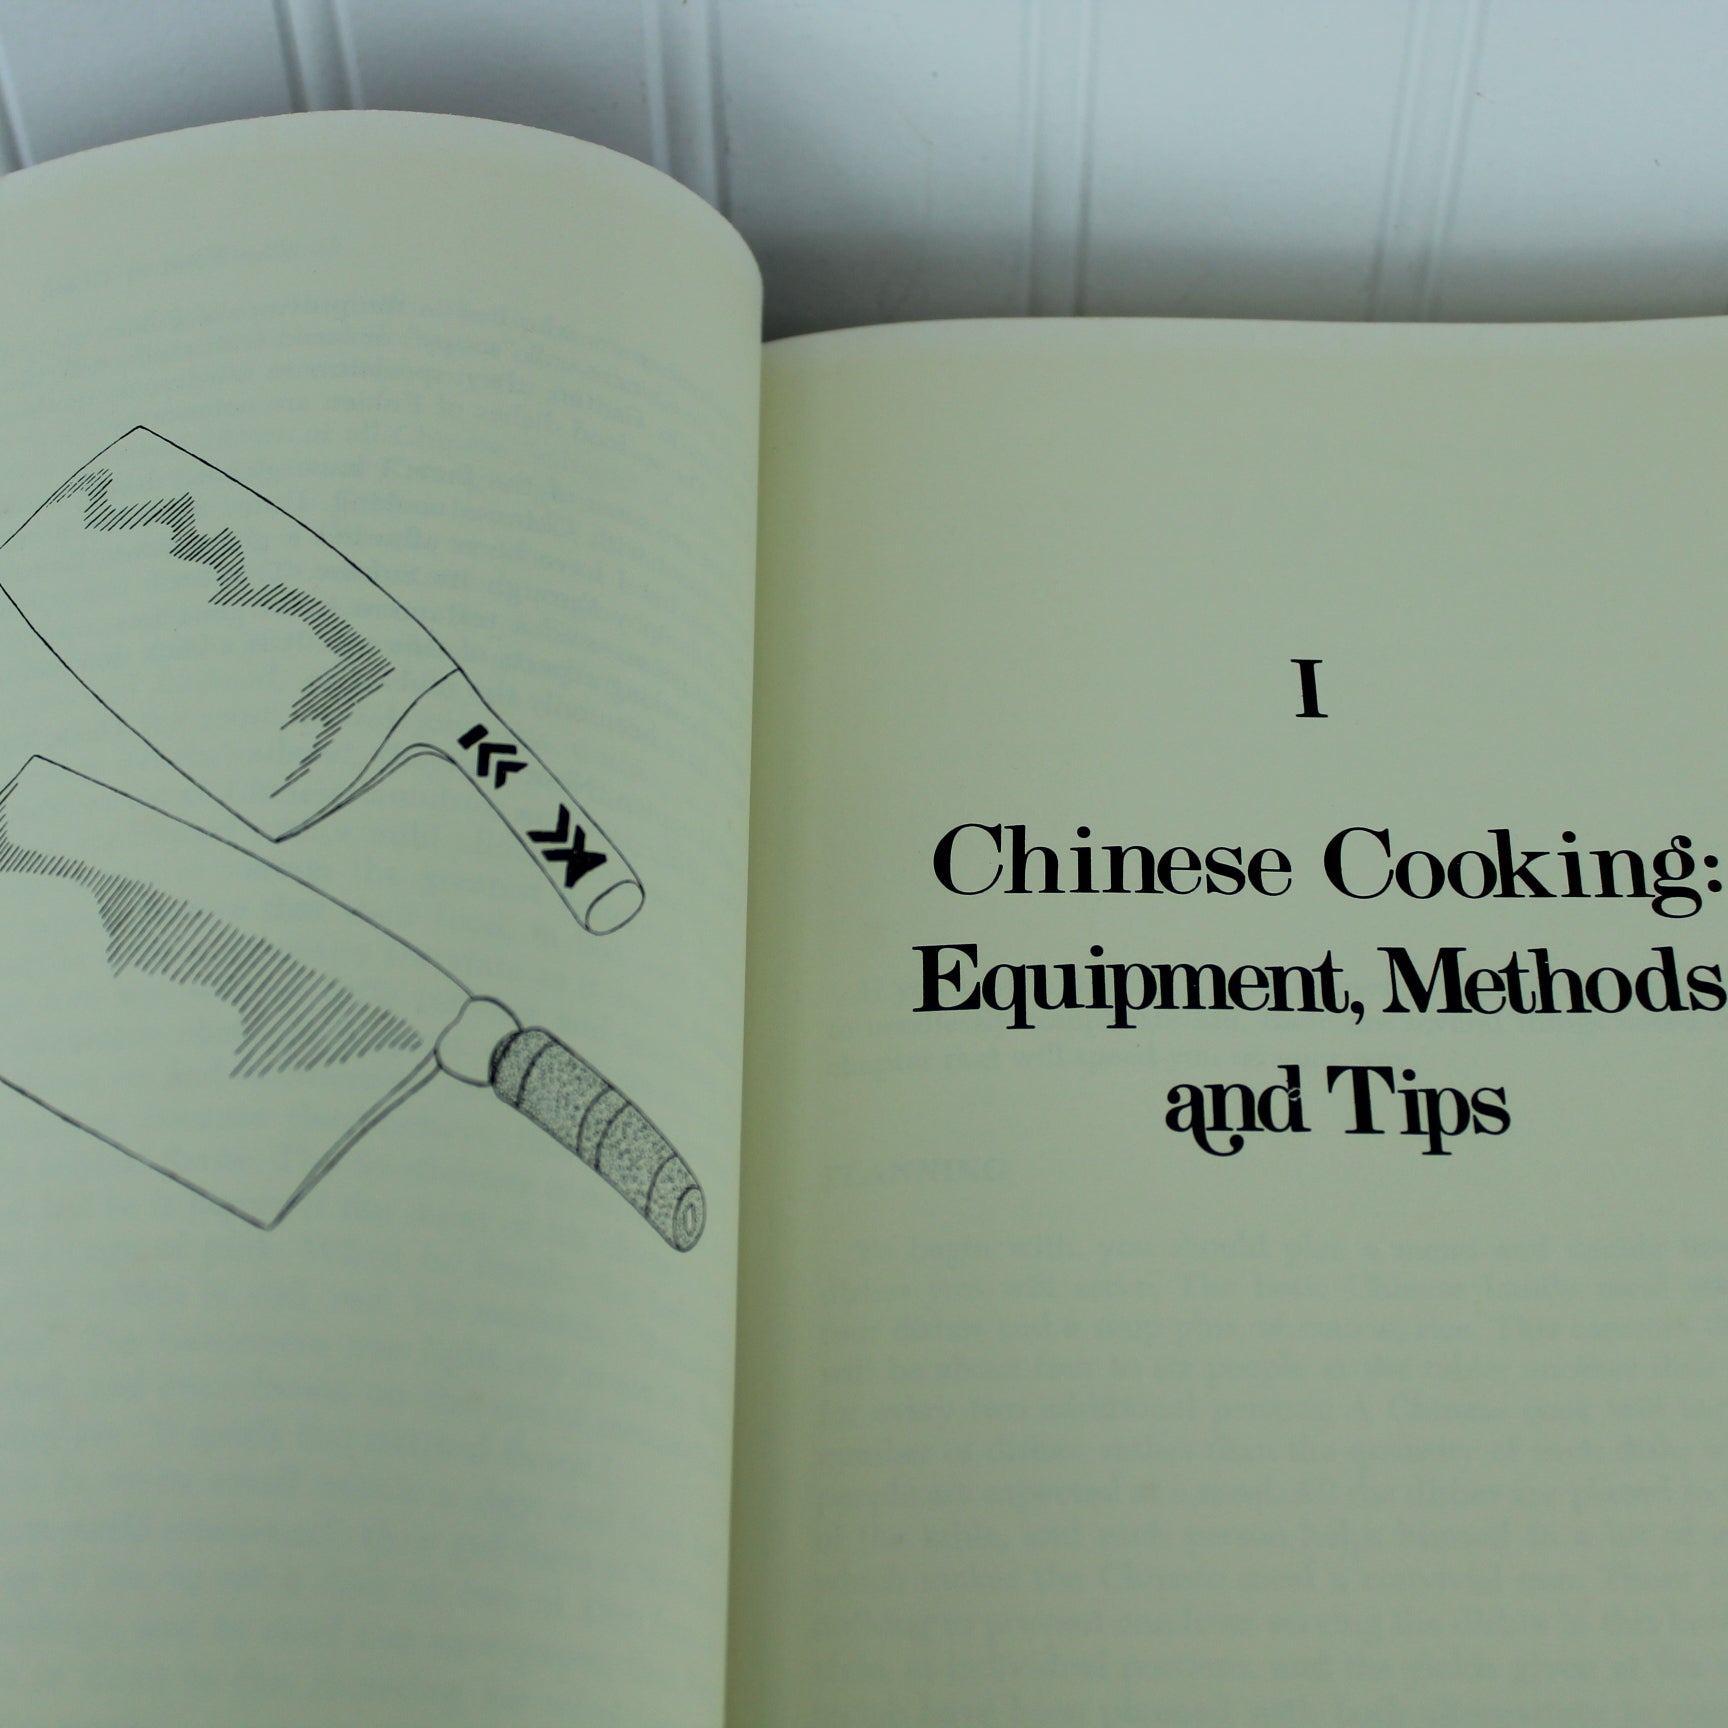 Collection 2 Classic Vtg Cookbooks Chinese Cookbook Claiborne 1972 & French Cooking Woman's Day 1969 equipment for chinese cooking